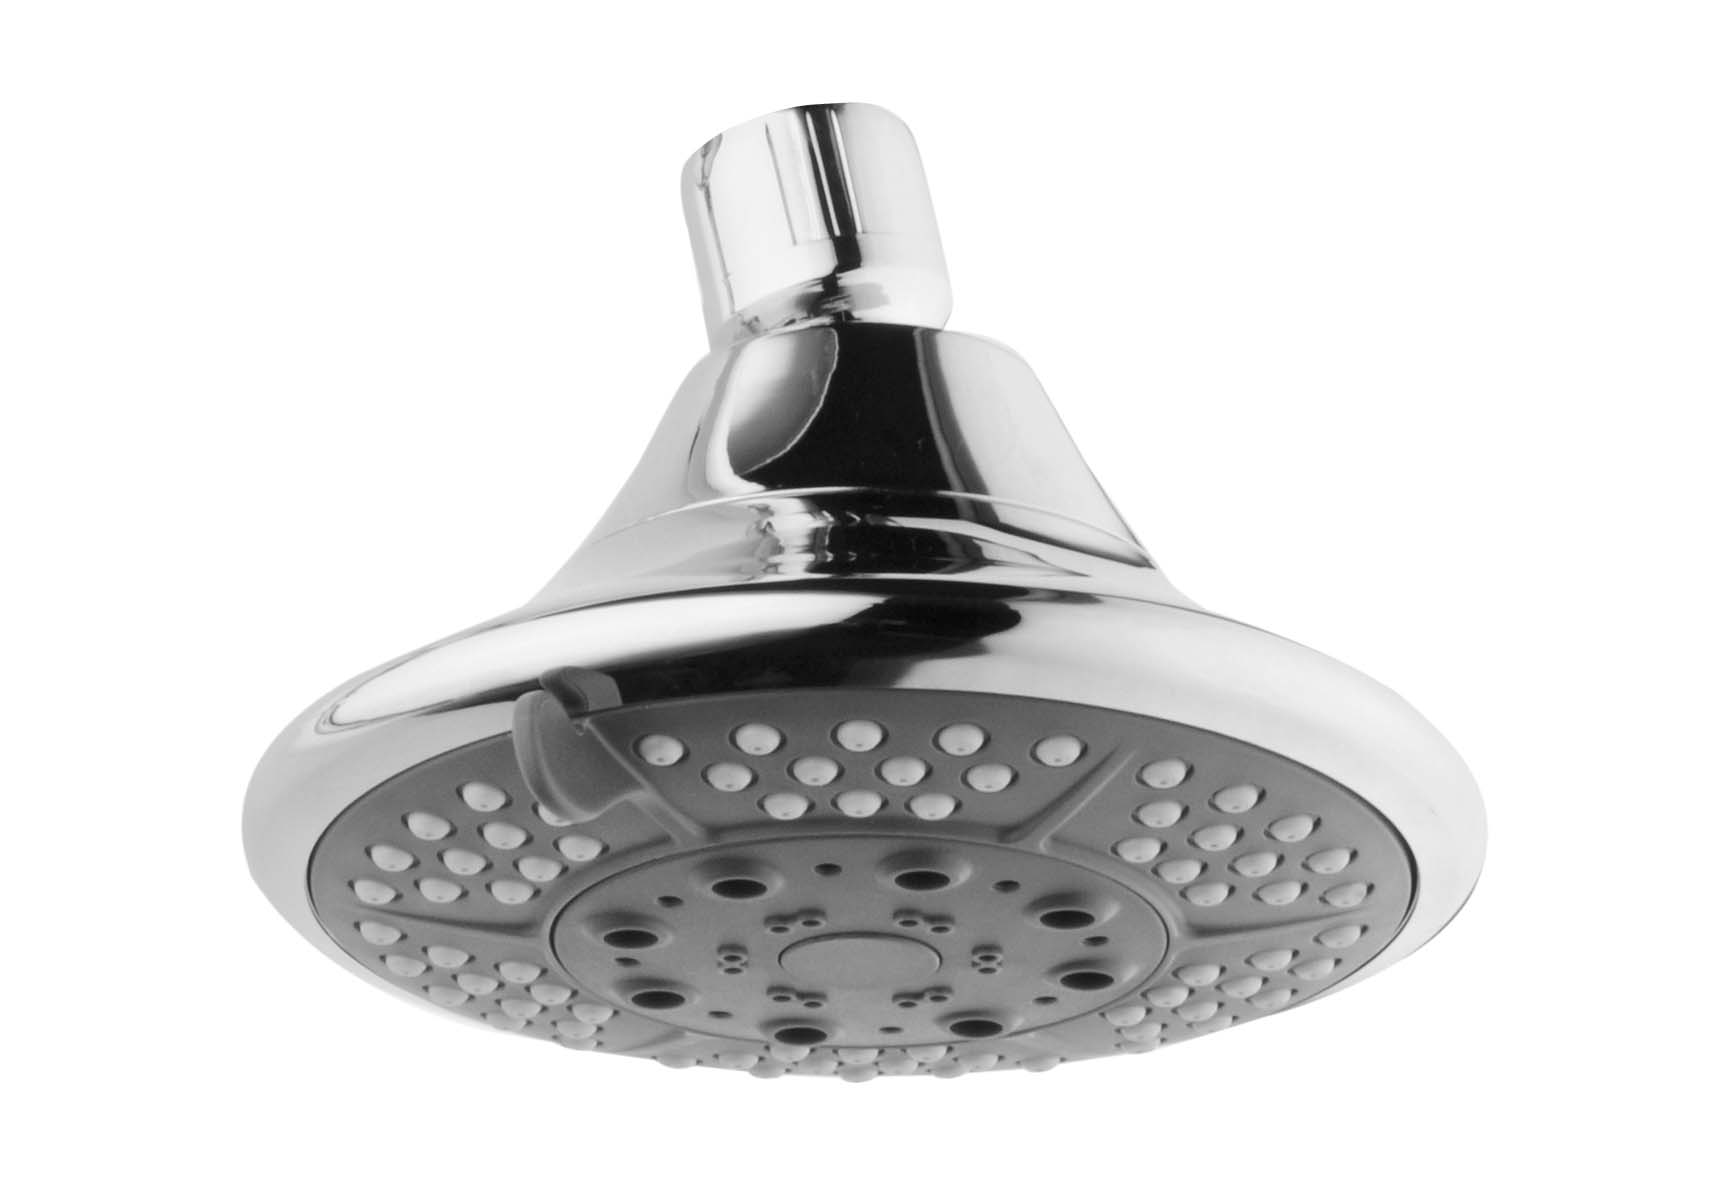 Therapy 5f Showerhead